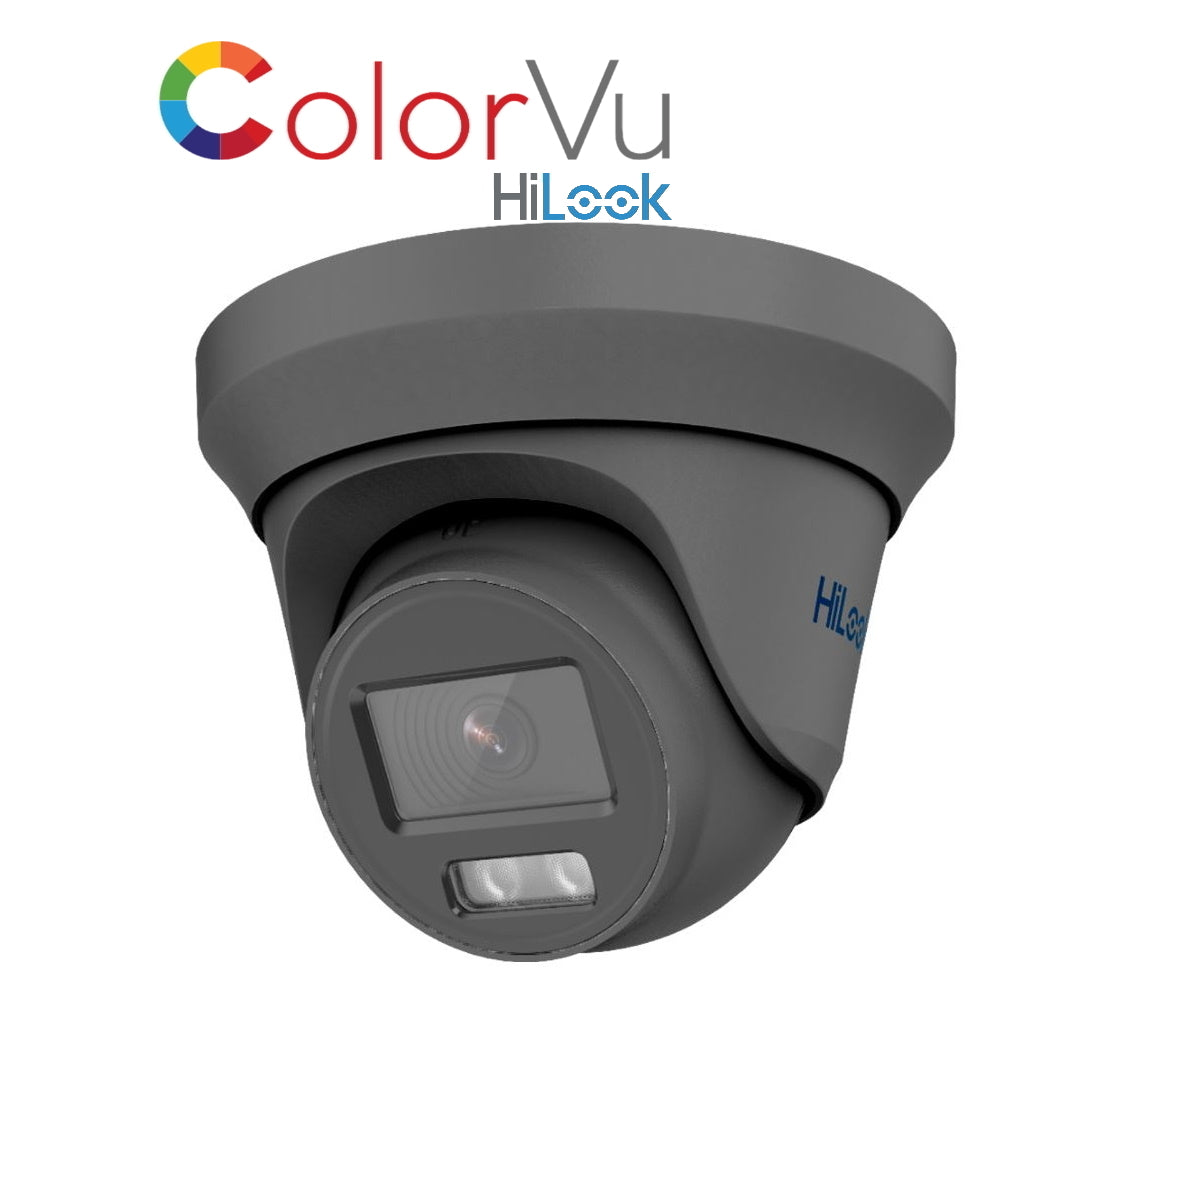 THC-T259-MS 2.8mm HiLook 5MP HD-TVI ColorVu analogue turret camera with built-in mic and 40m LED in white or grey